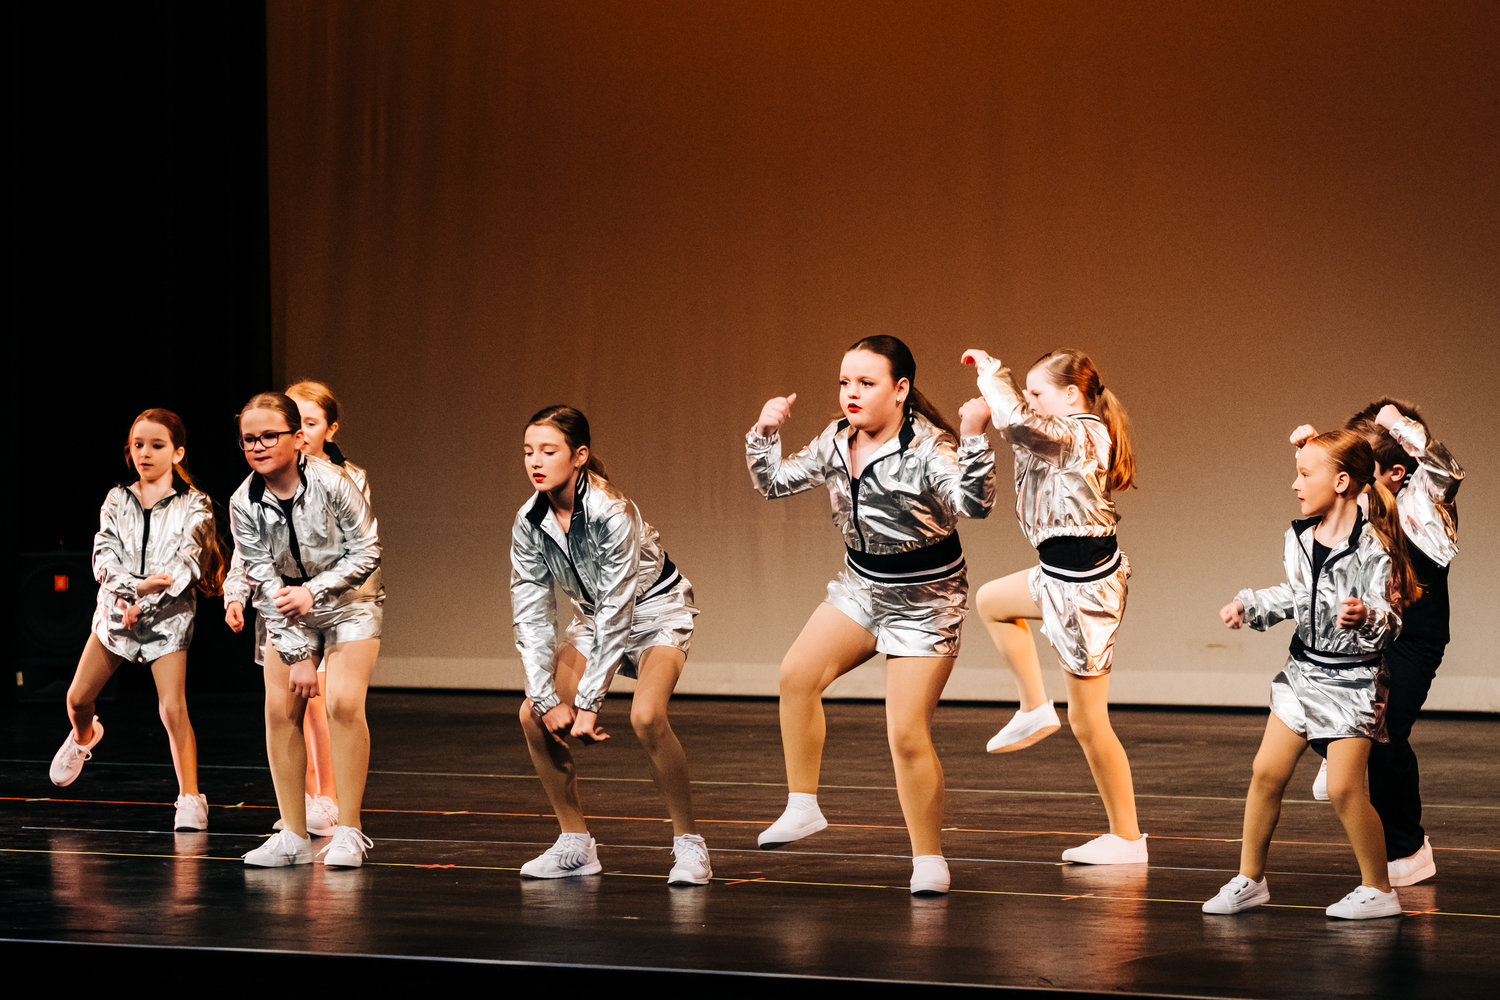 Students perform “I Want to Work as an Astronaut” during Saturday's WORK show by the YMCA Academy of Dance at Memorial Auditorium.